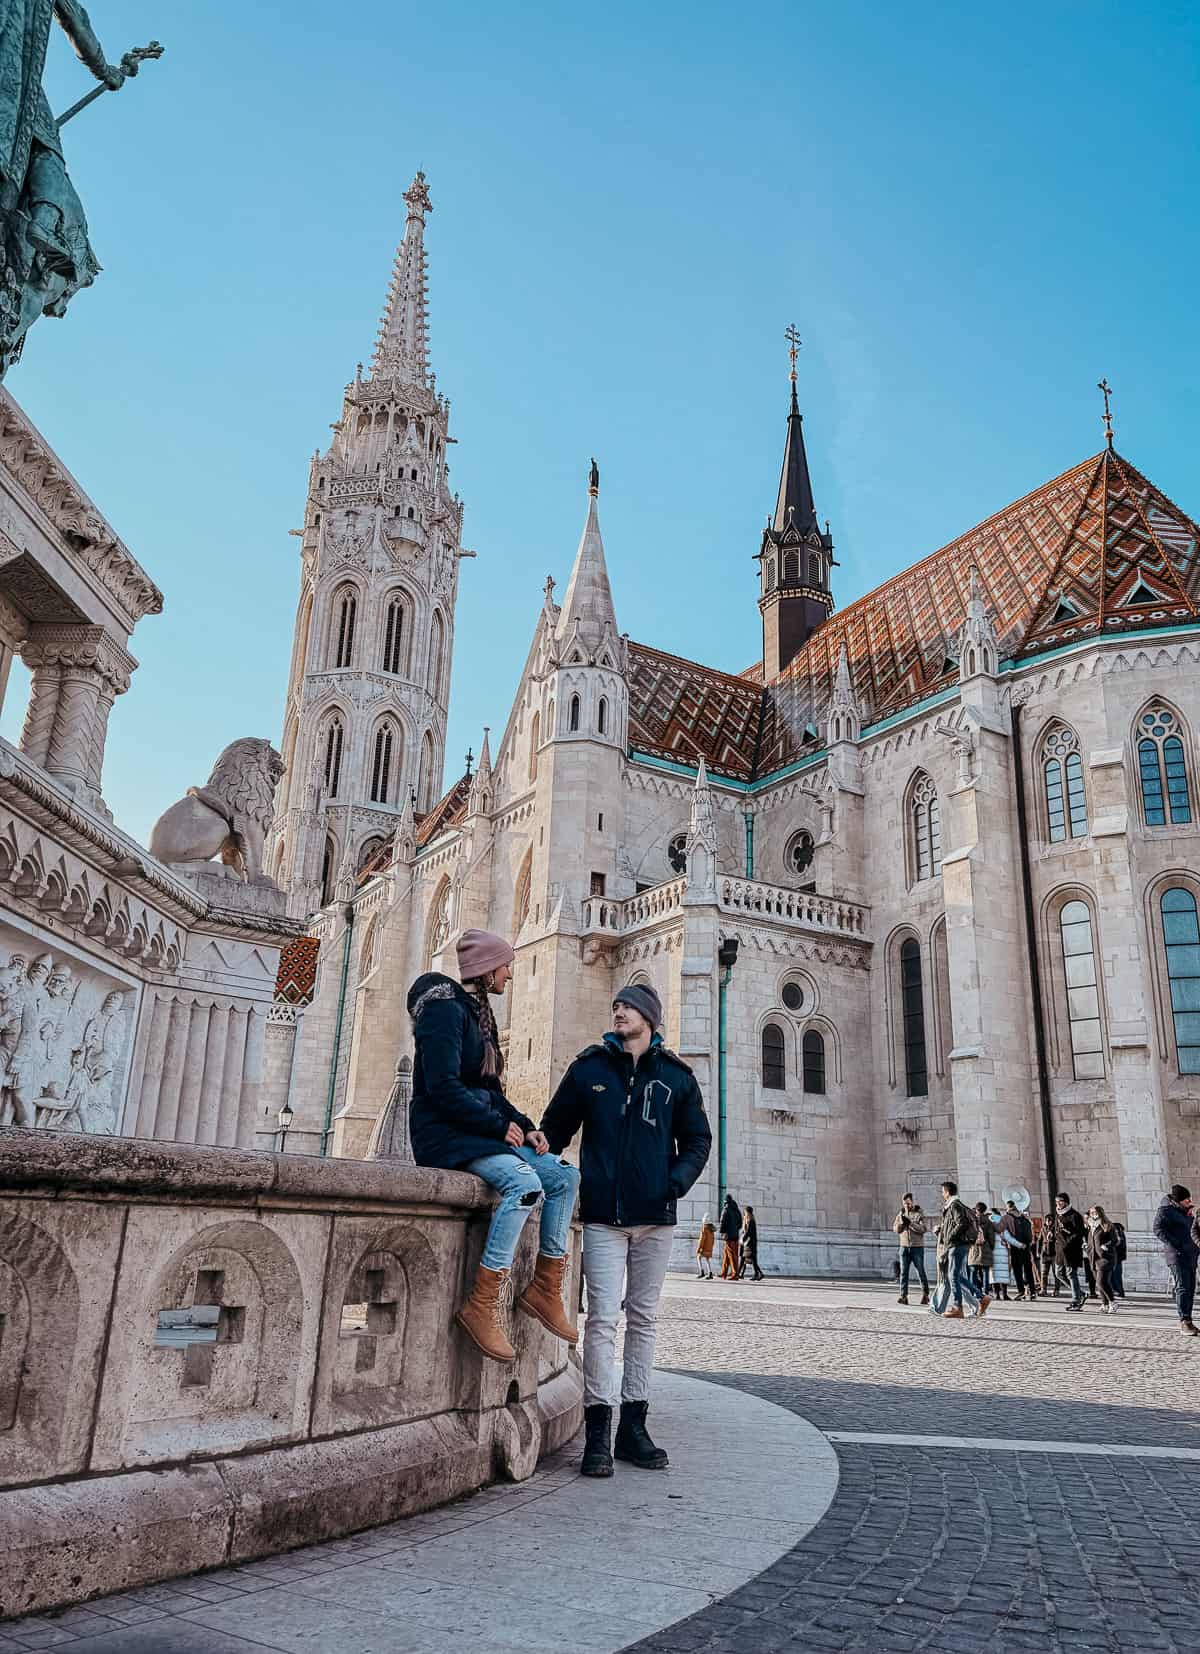 A couple dressed in winter clothing is sitting and standing on a ledge outside Matthias Church in Budapest, with its distinctive spires and roof tiles visible.